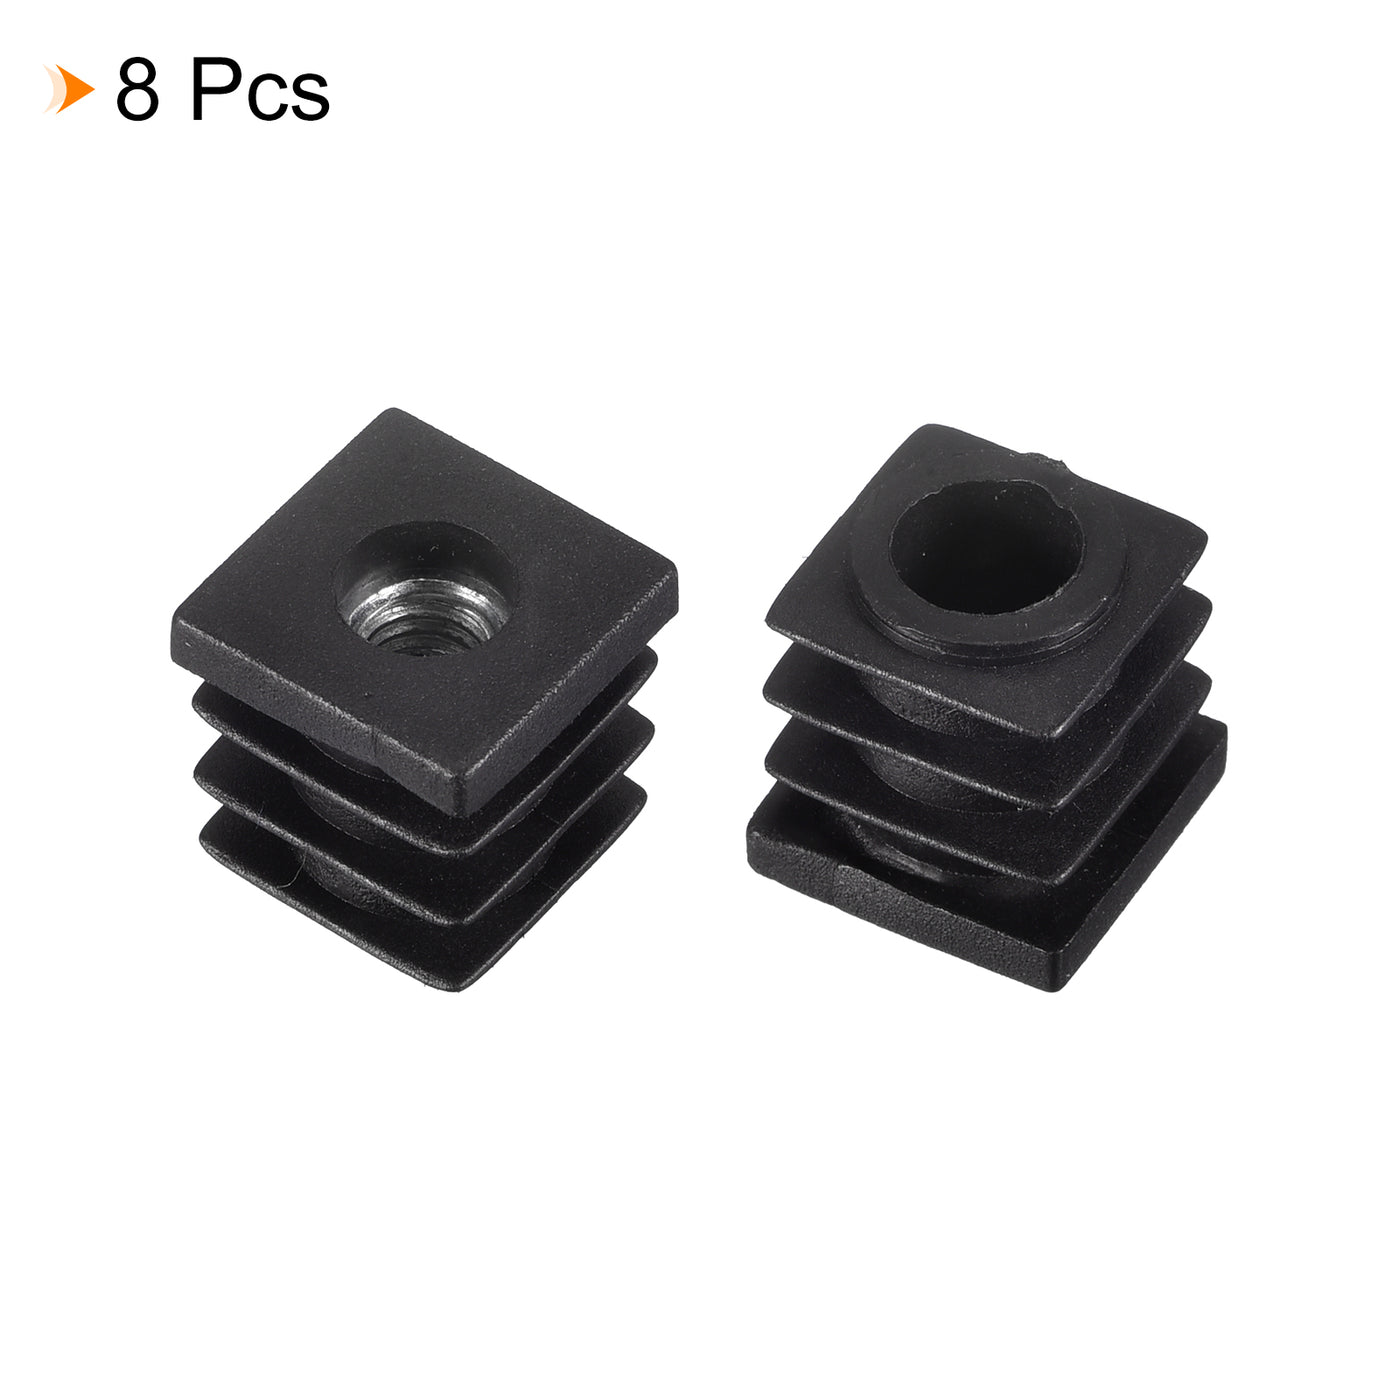 uxcell Uxcell 8Pcs 0.63"x0.63" Caster Insert with Thread, Square M6 Thread for Furniture